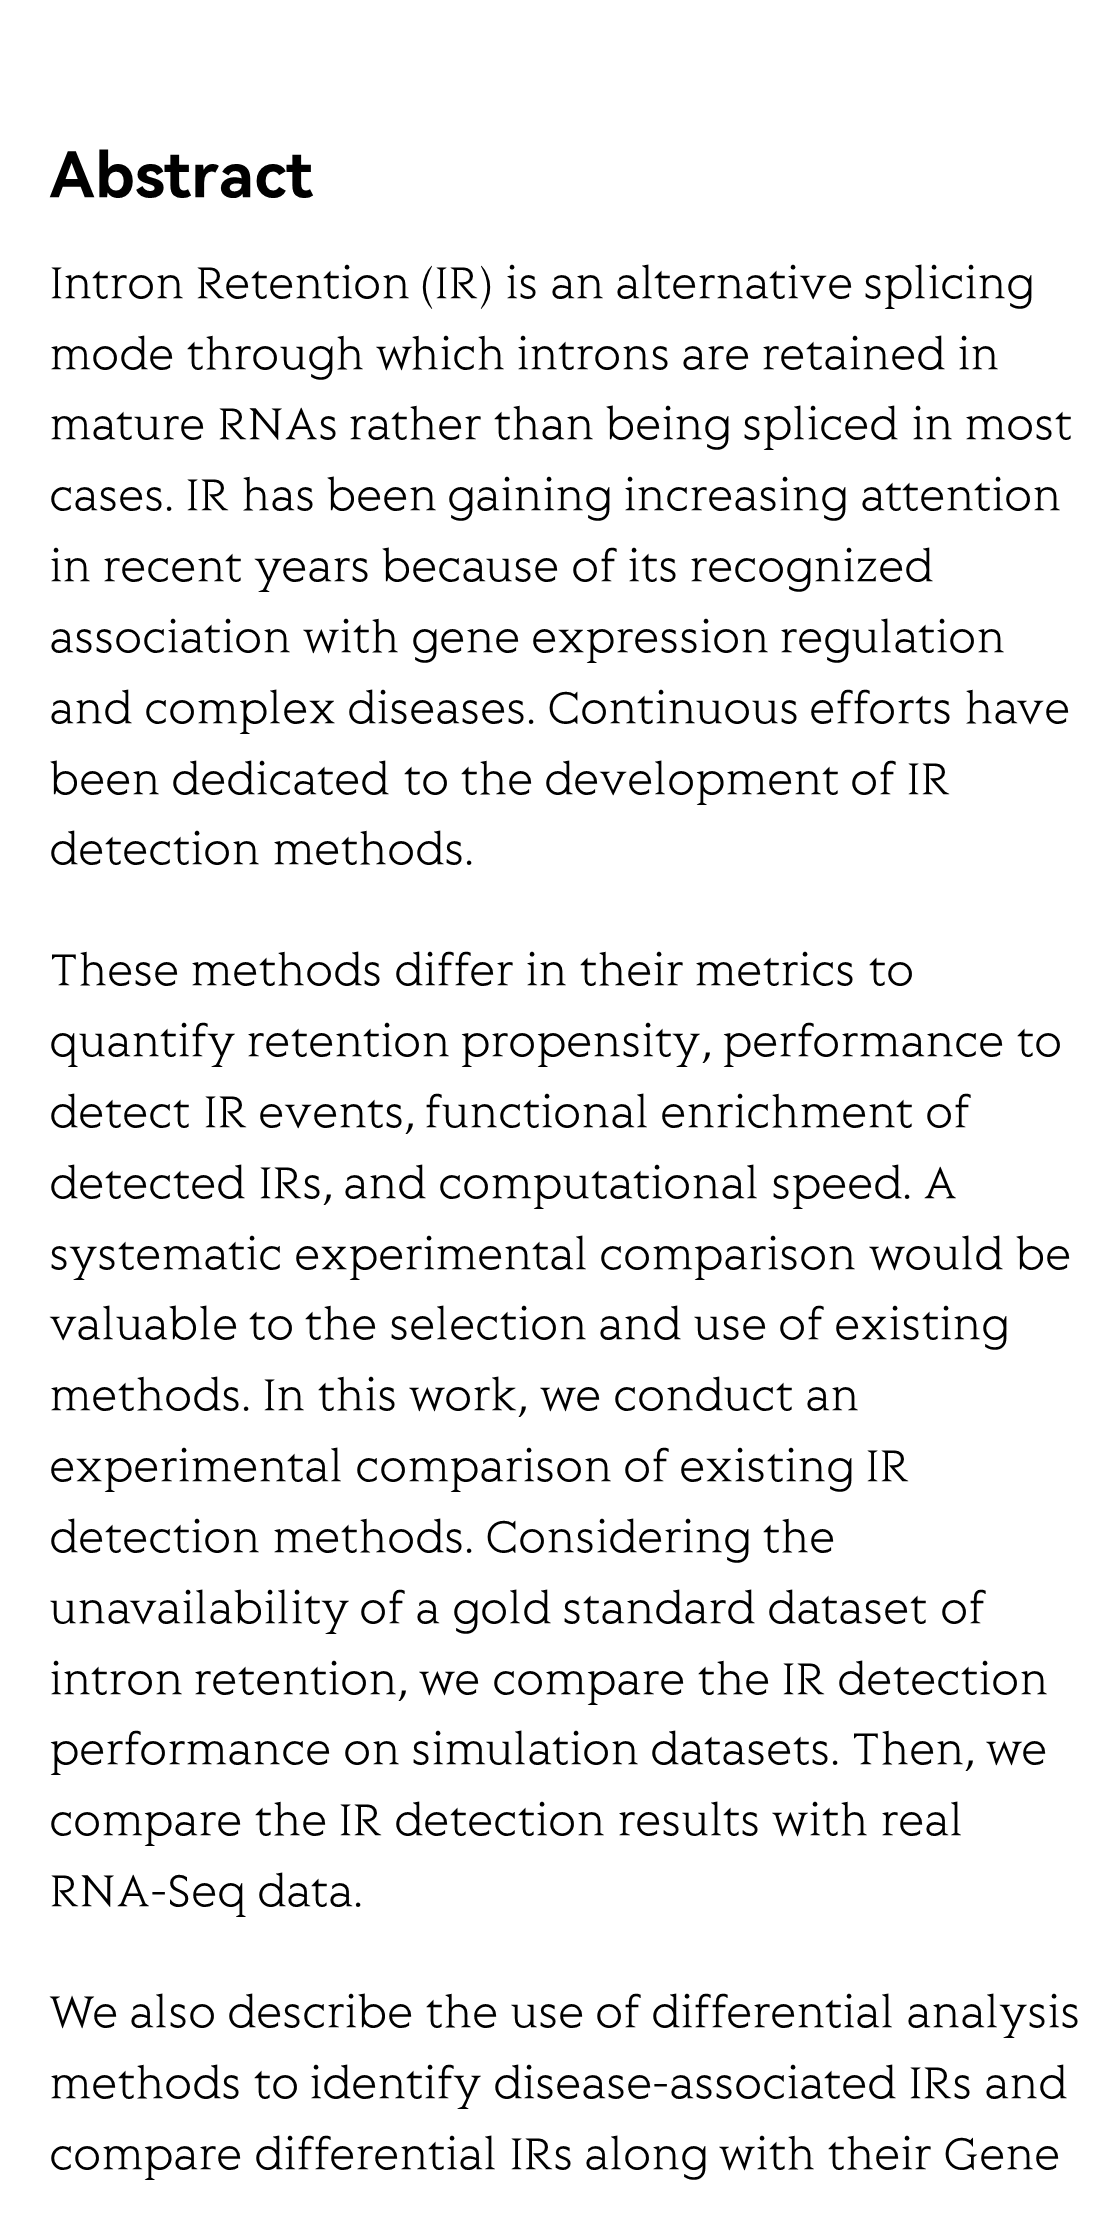 A Comparison of Computational Approaches for Intron Retention Detection_2